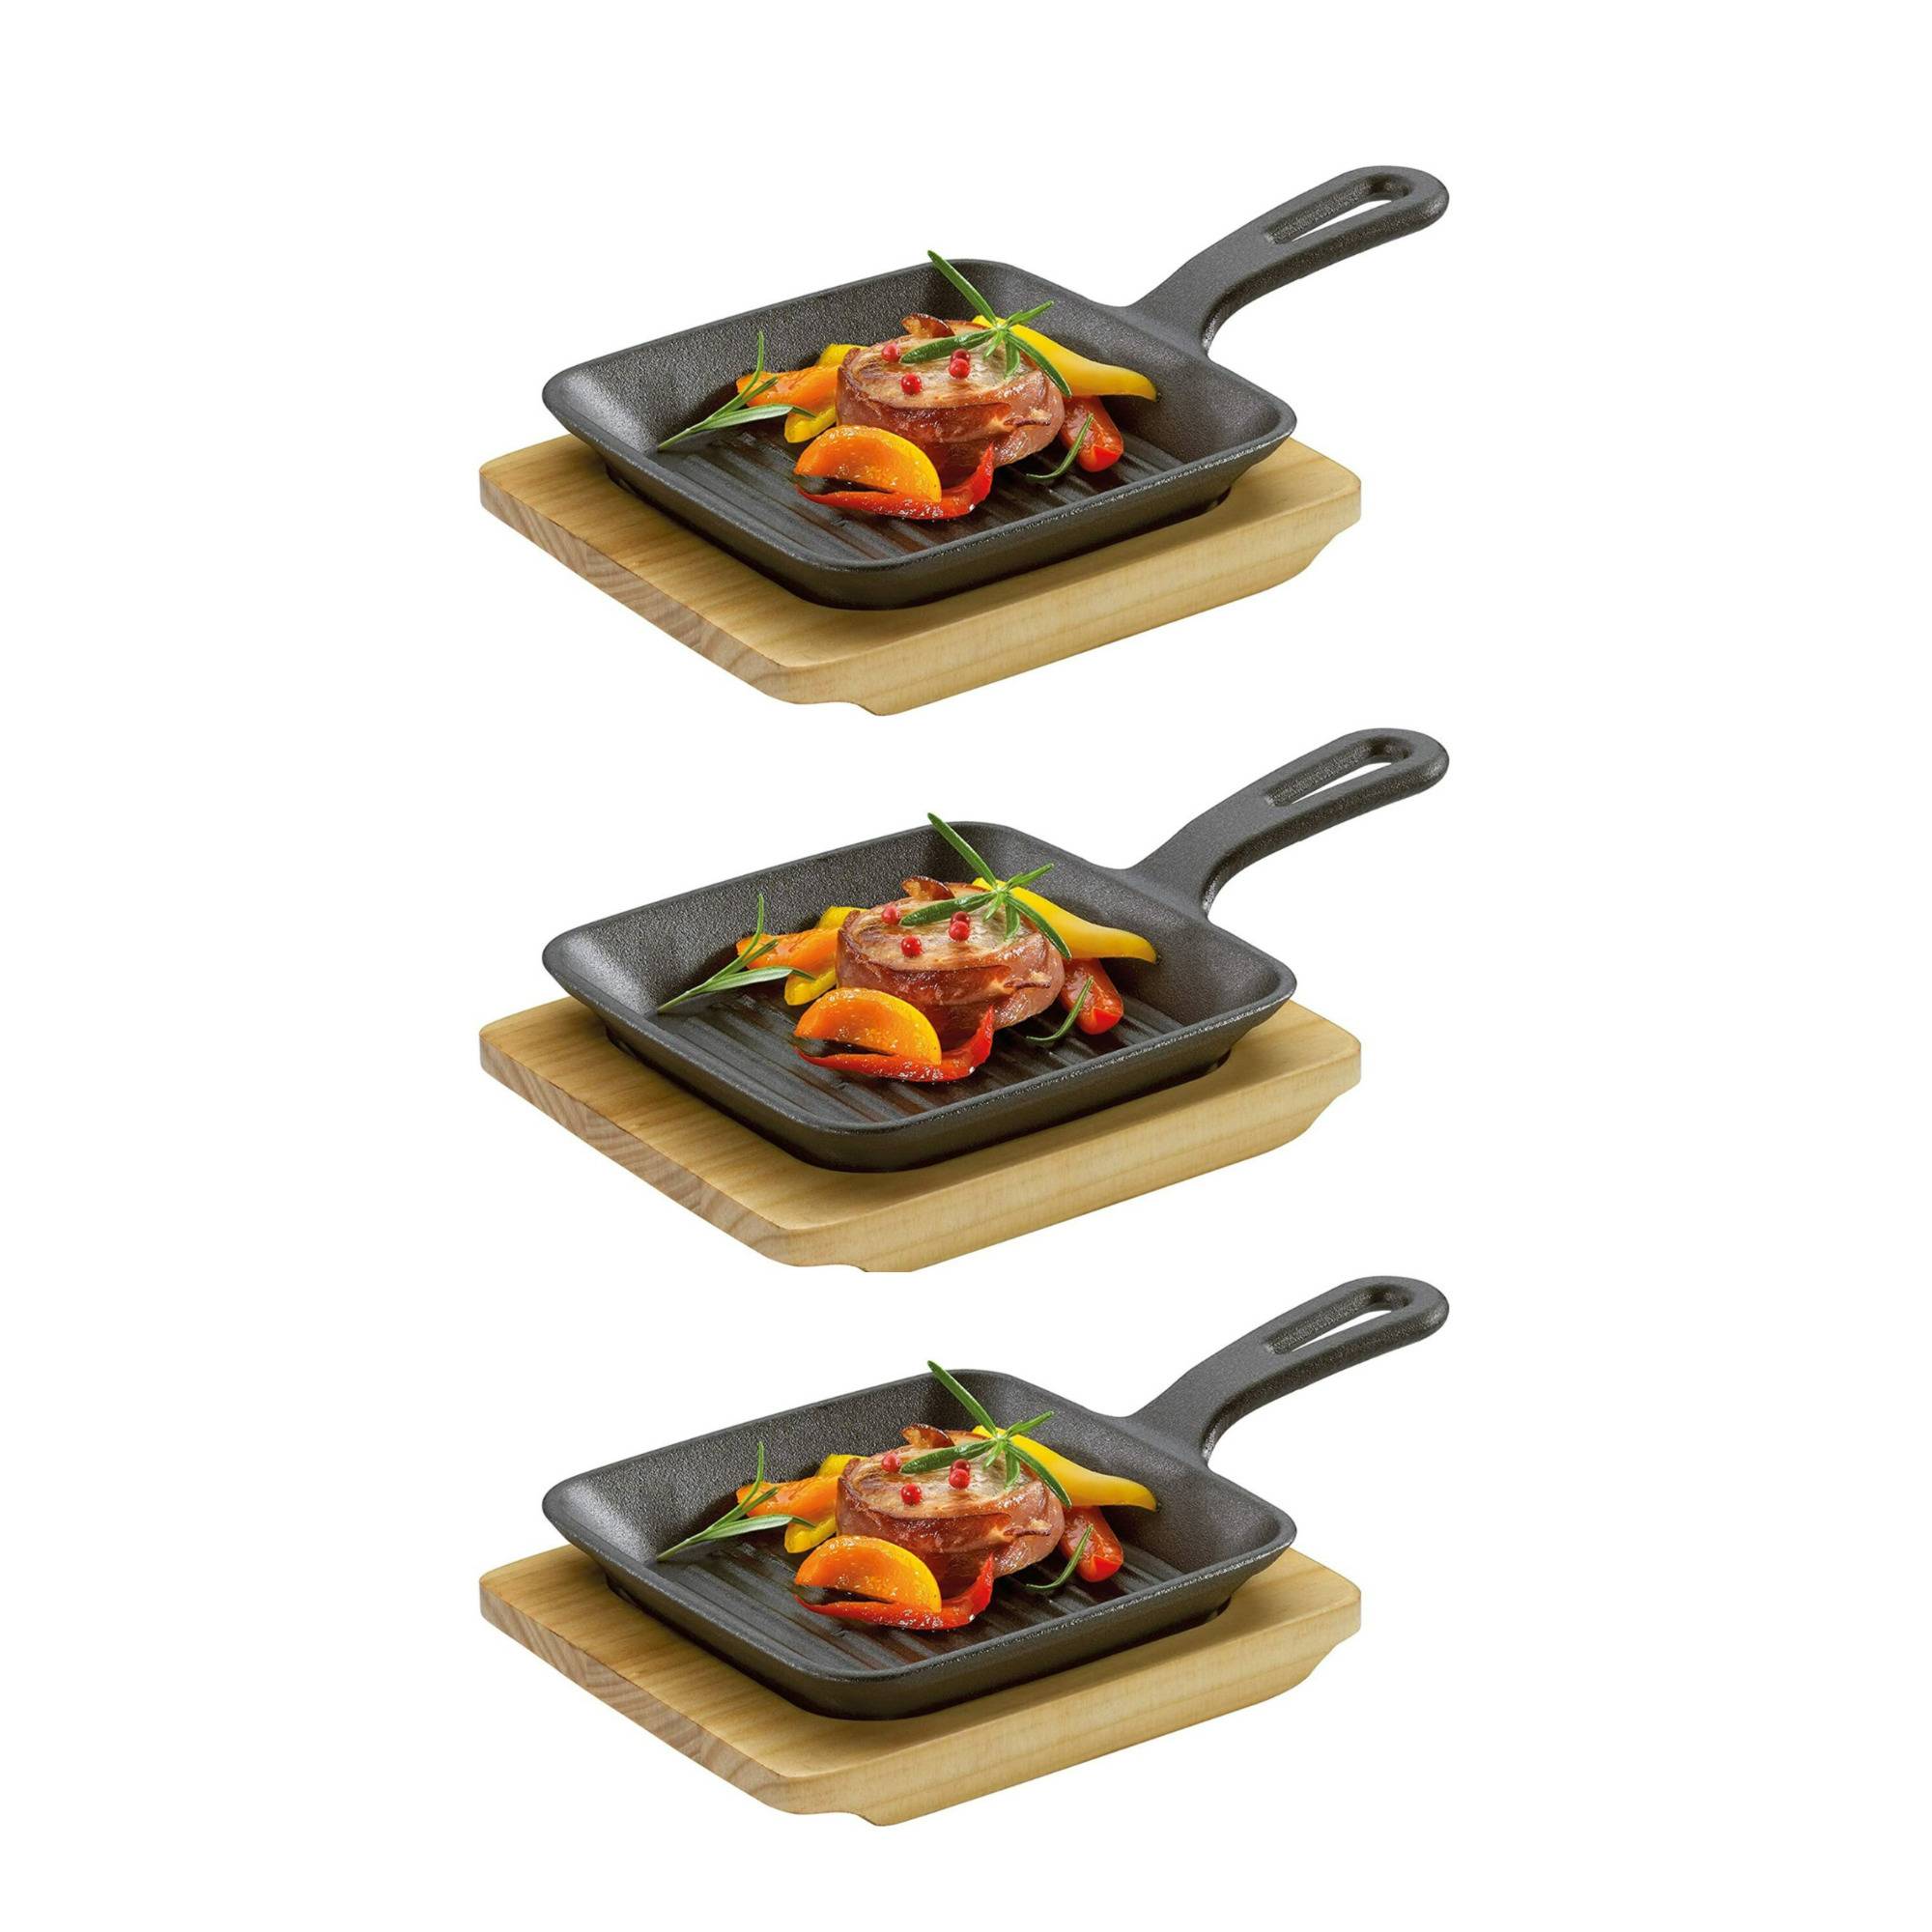 Kuechenprofi BBQ Grill / Serving Pan with Wooden Board (3 pack)